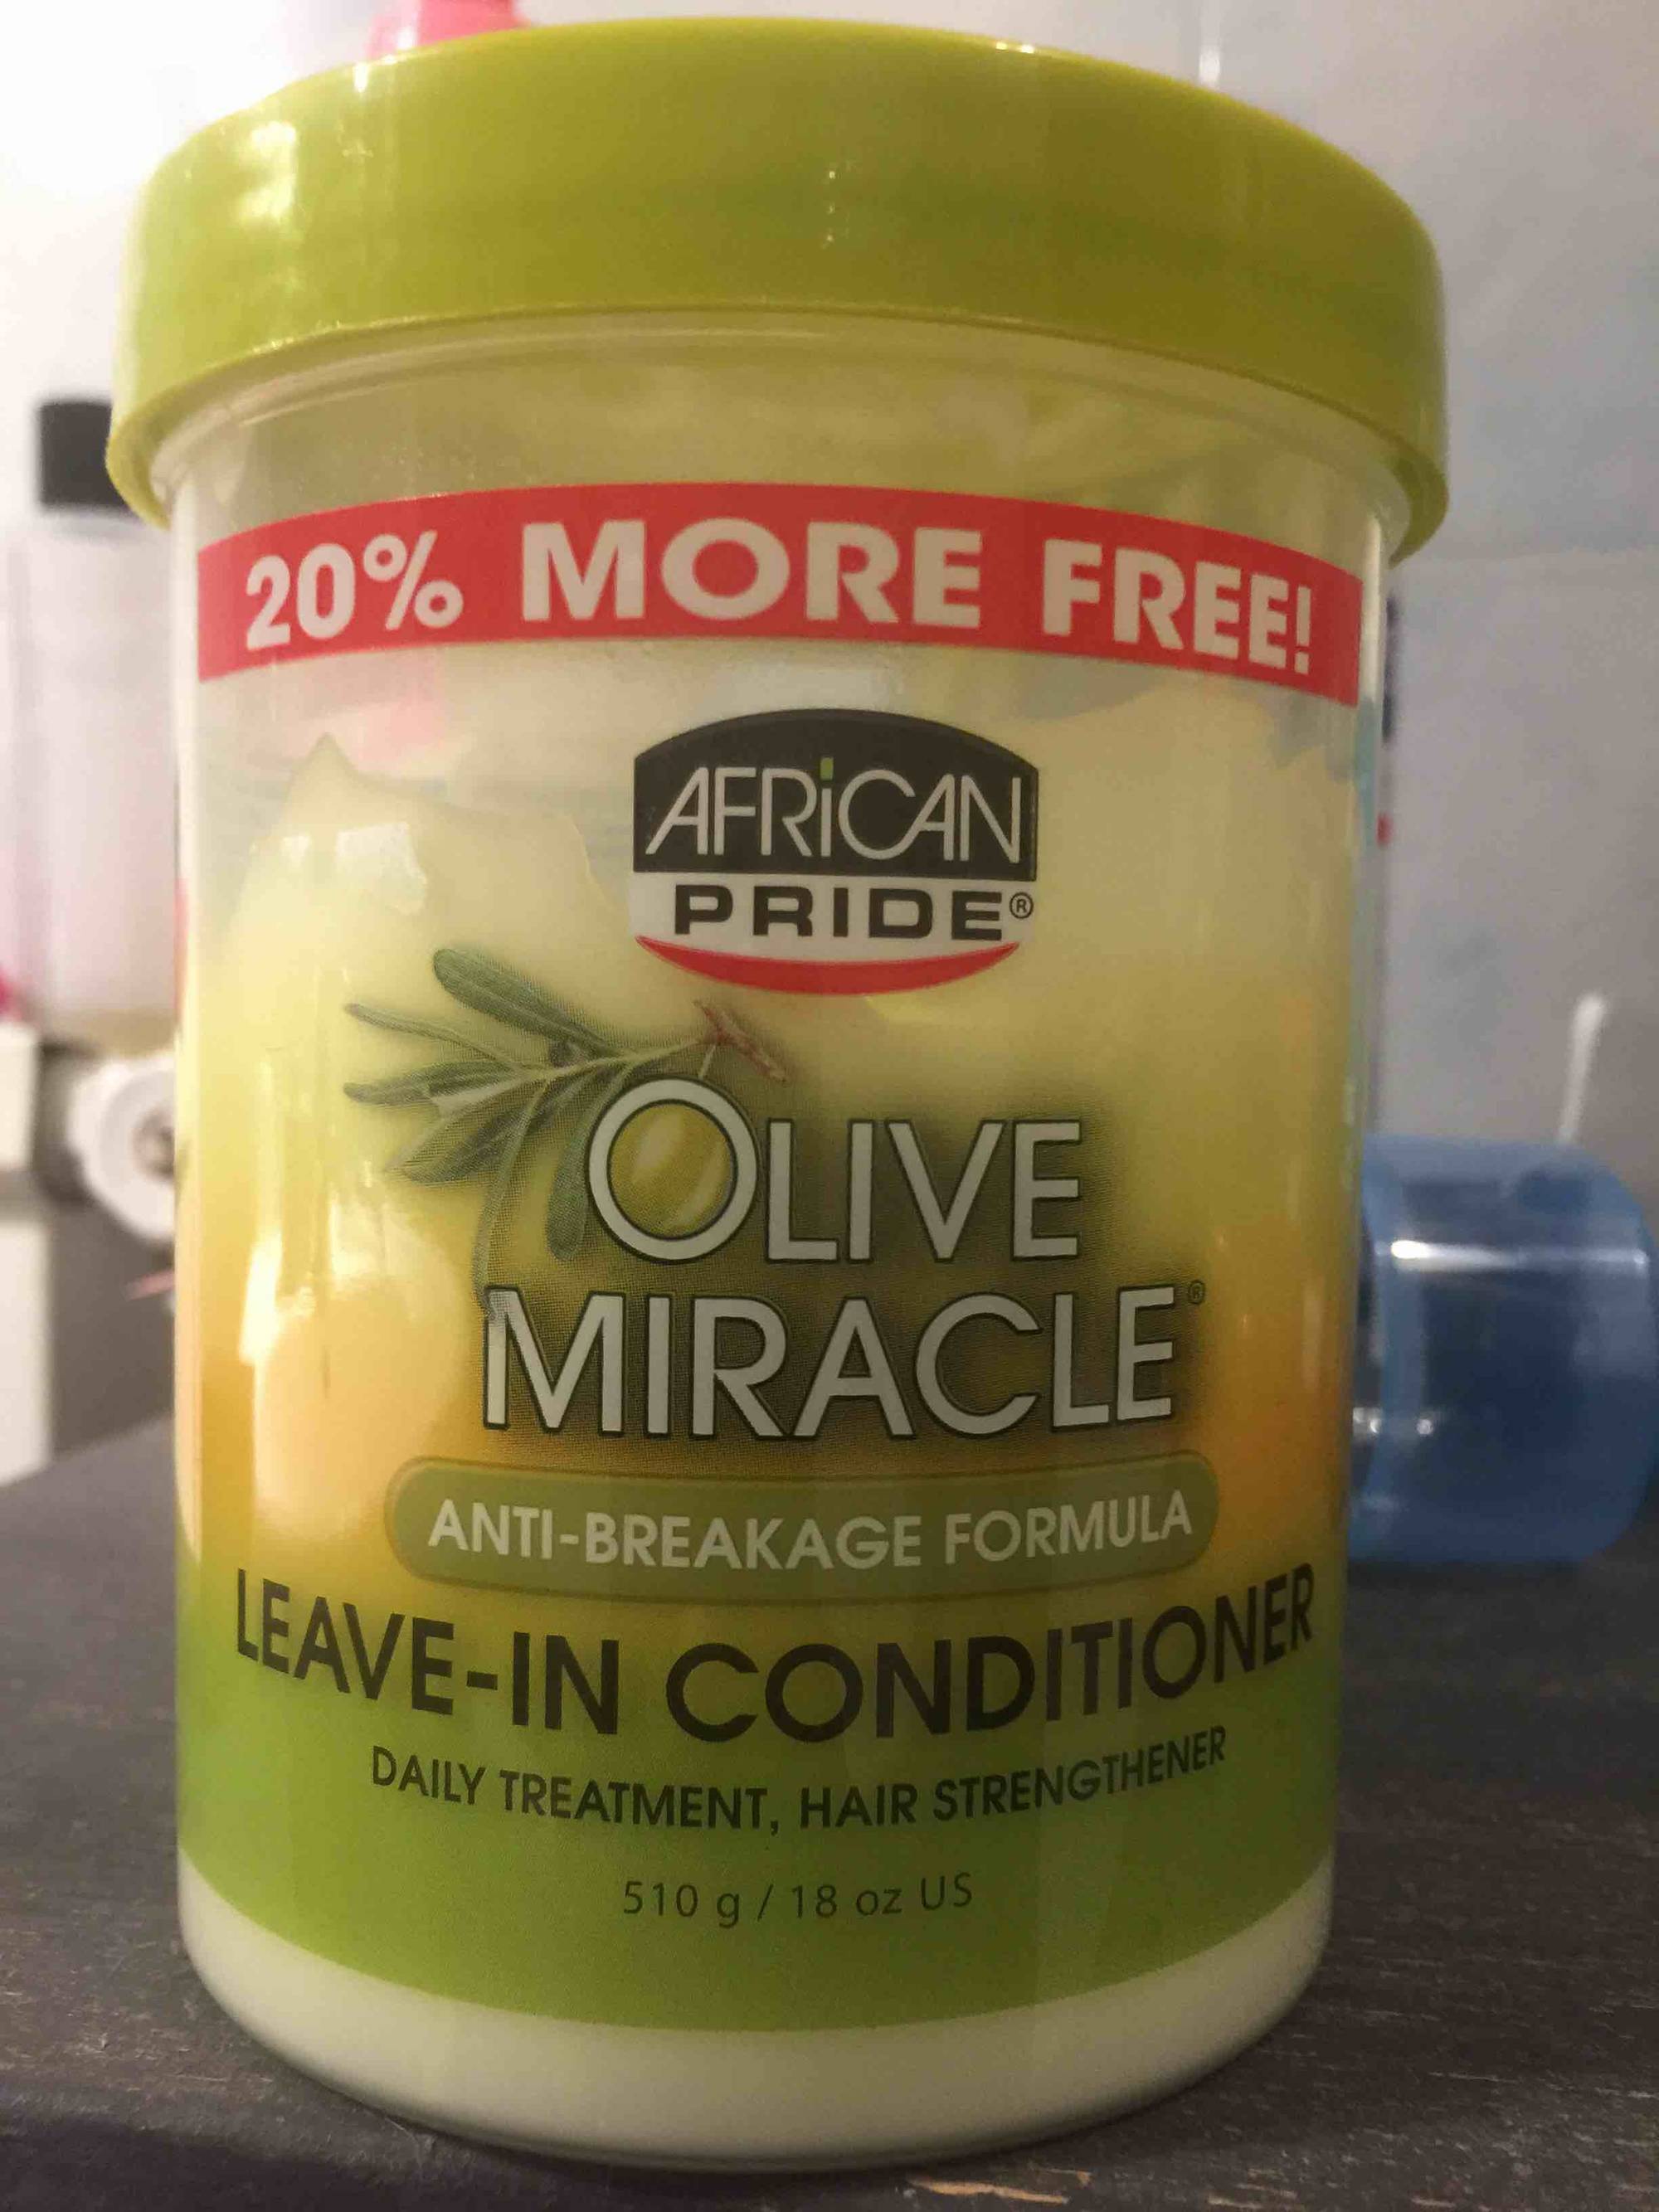 AFRICAN PRIDE - Olive miracle anti-breakage formula - Leave-in conditioner